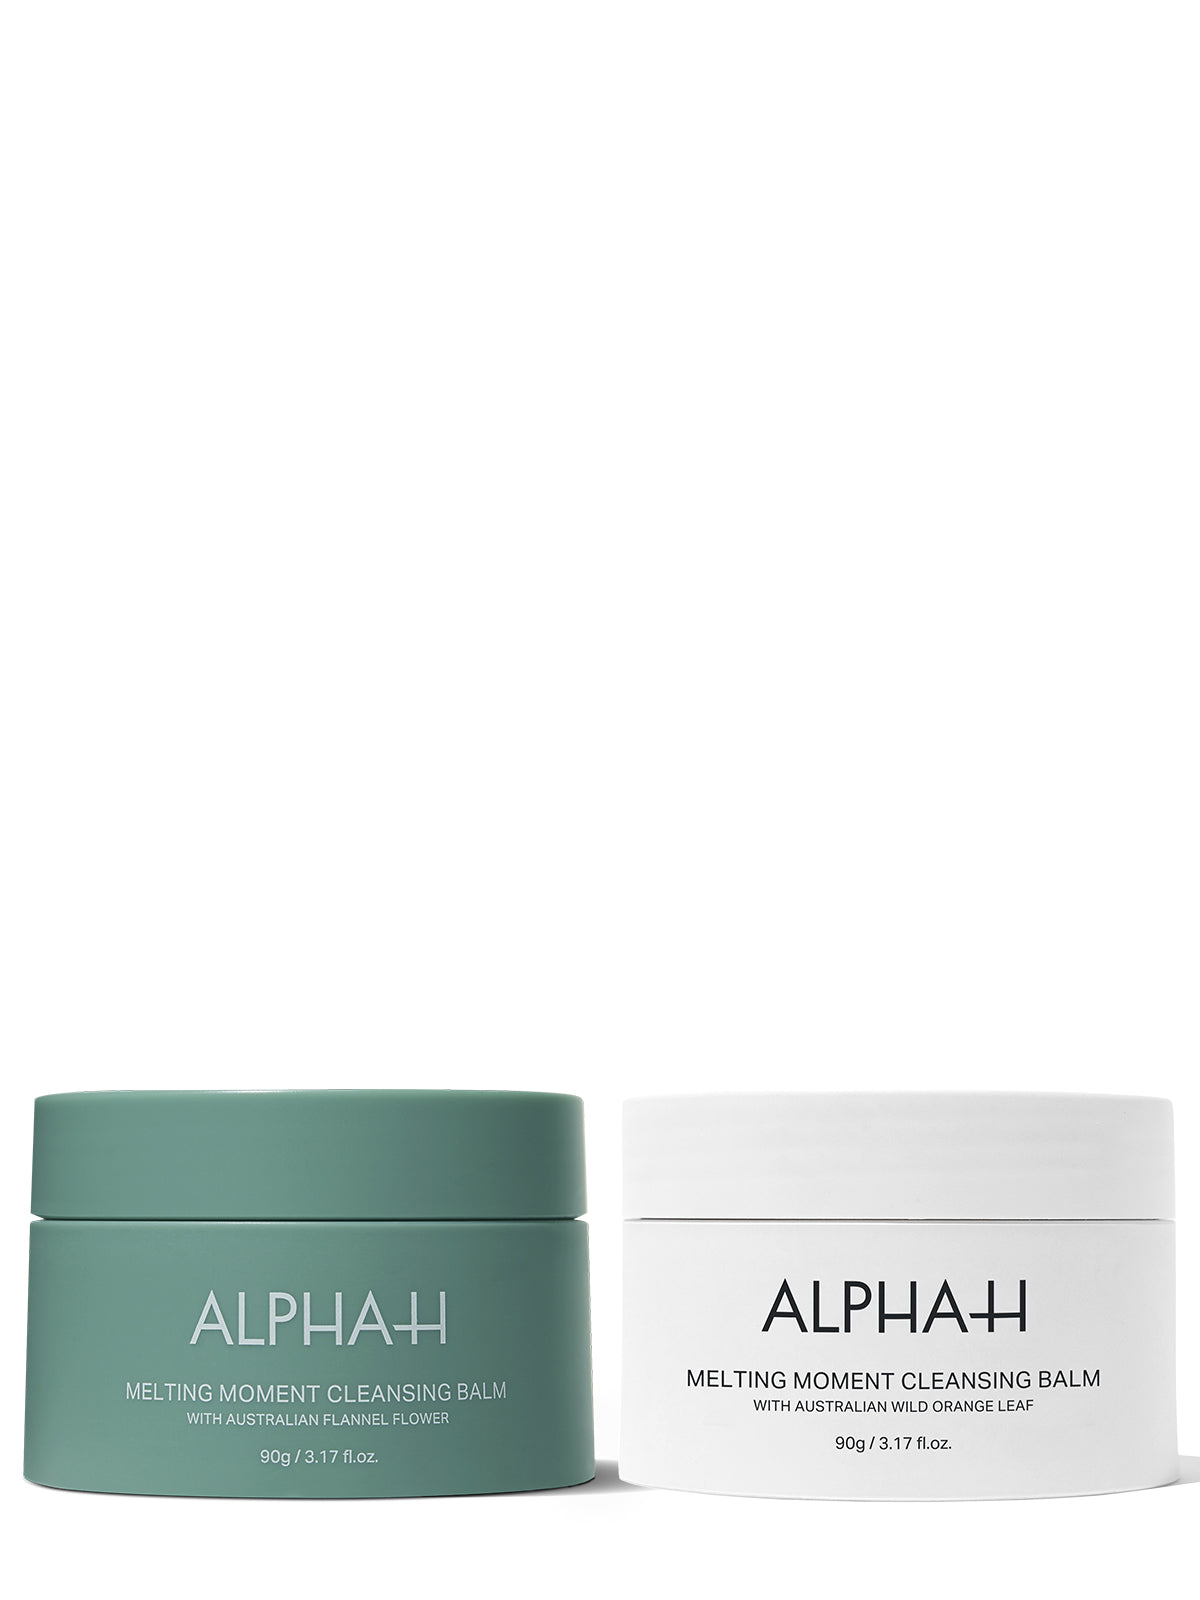 Limited Edition Cleansing Balm Duo